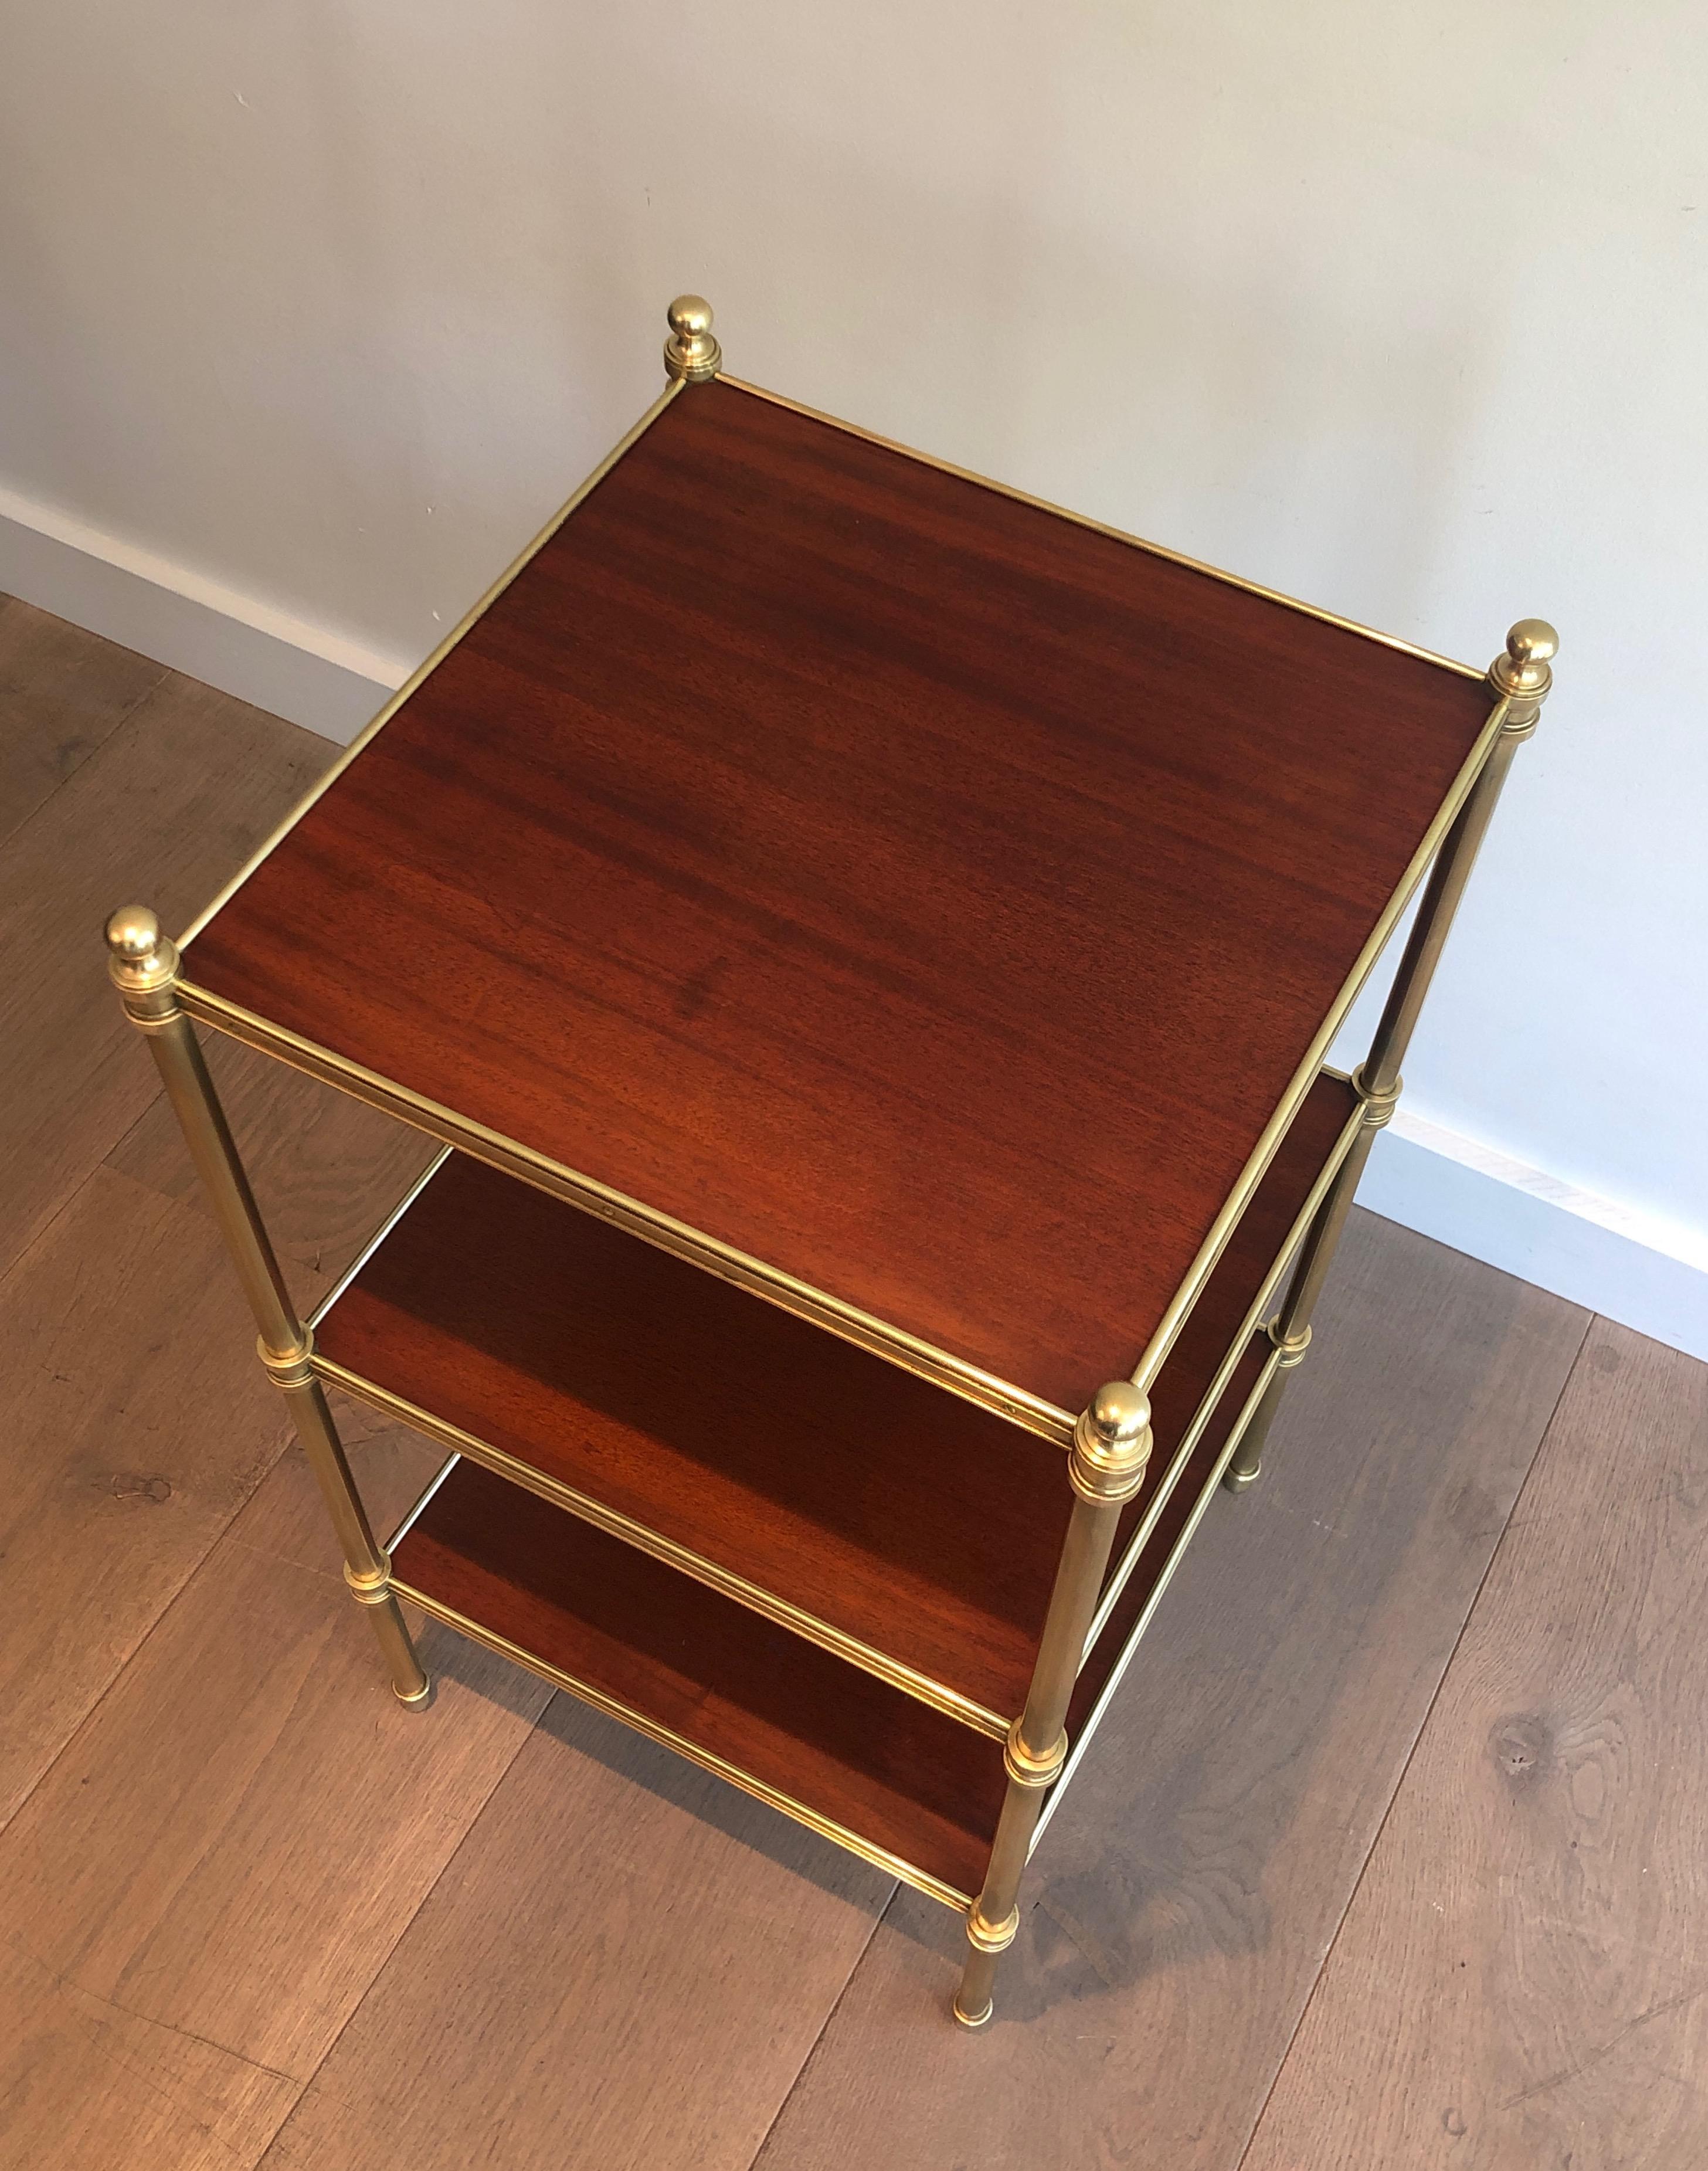 Three Tiers Mahogany and Brass Side Table by Maison Jansen In Good Condition For Sale In Marcq-en-Barœul, Hauts-de-France